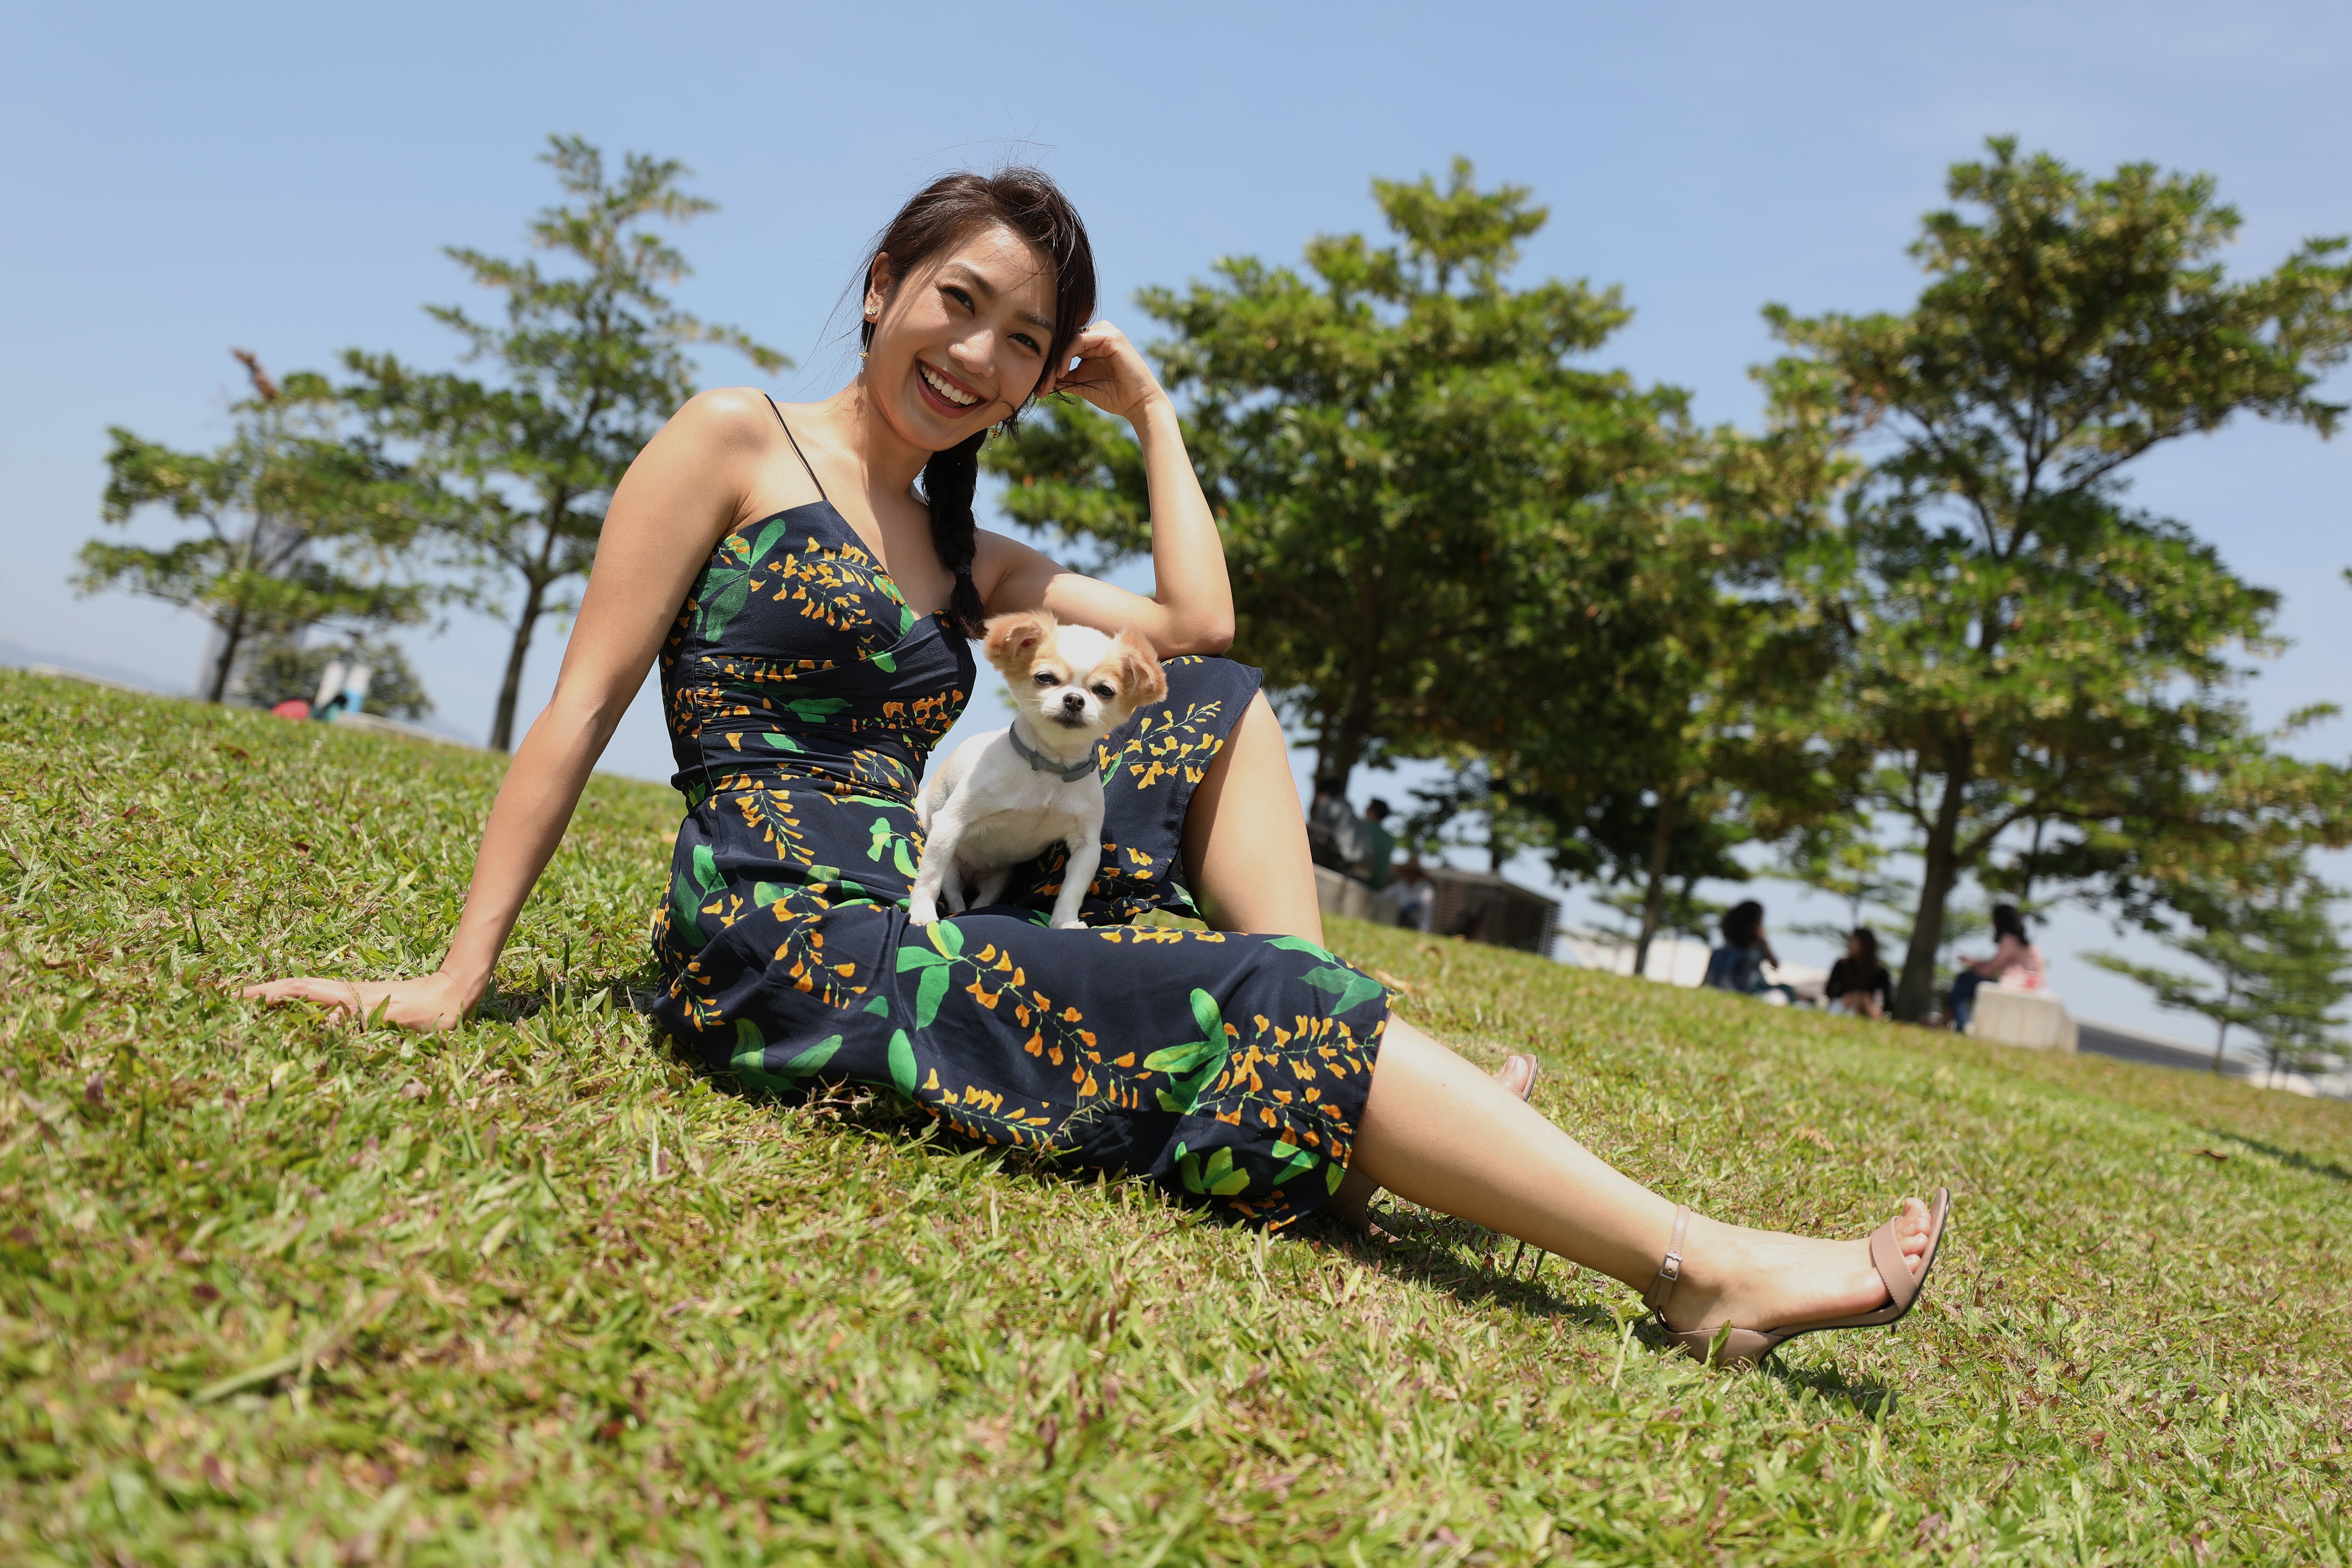 Singer-songwriter and actress Lesley Chiang with her dog Jellybean. Photo: Nora Tam